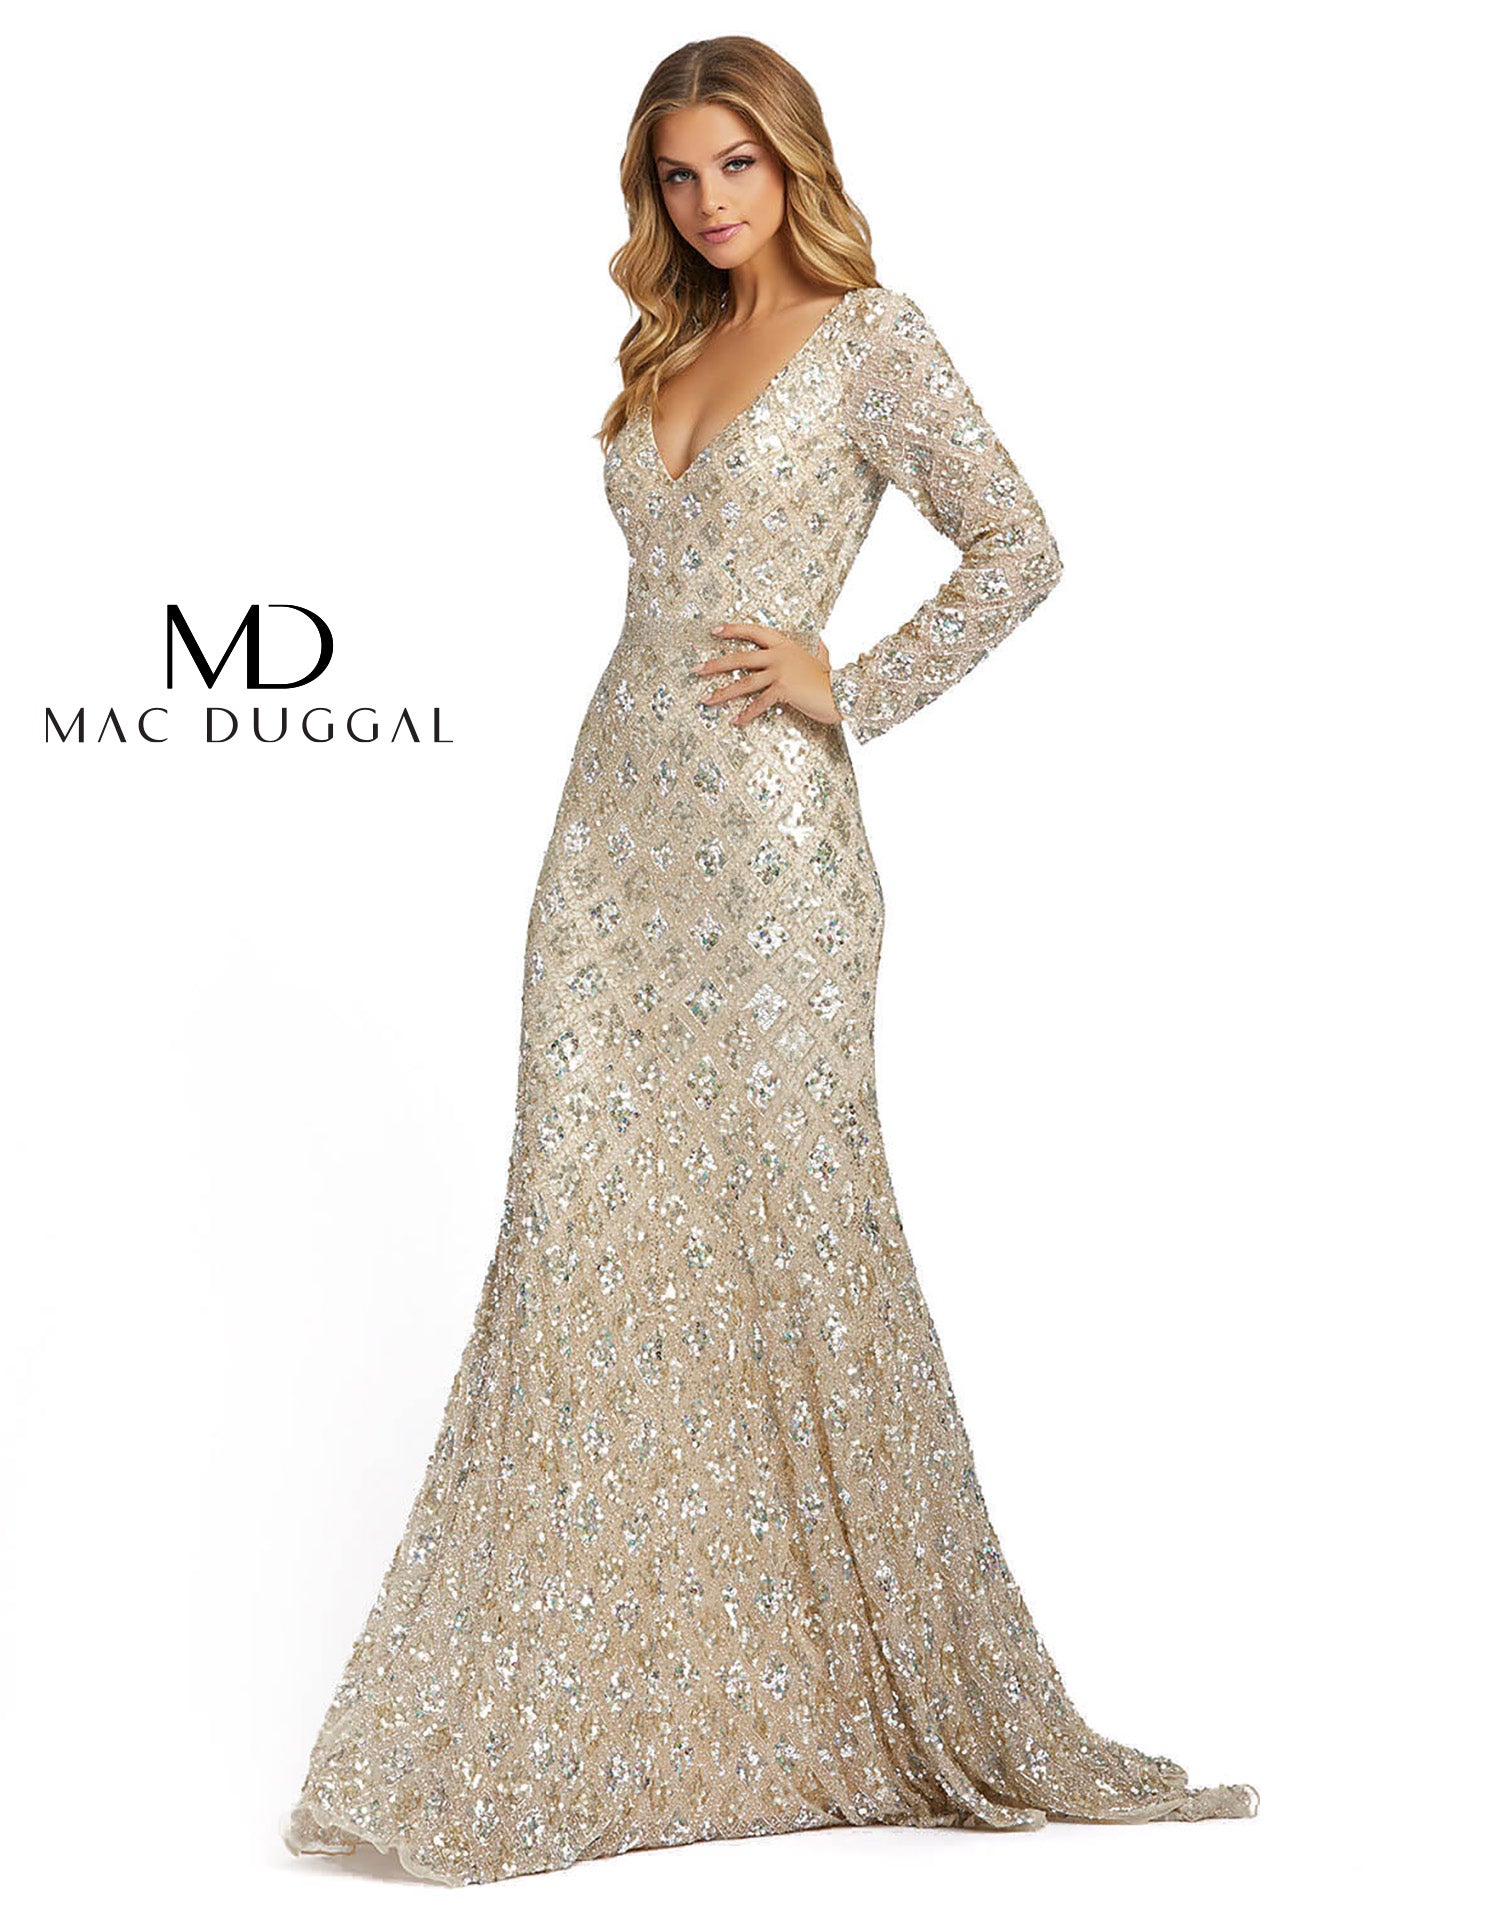 Ombré evening gown with geometric embellishment throughout the mesh overlay. This elegant long-sleeve evening gown features a hand-beaded belt at the natural waist and a floor-length trumpet skirt. Mac Duggal Back zipper Fully lined through bodice and ski